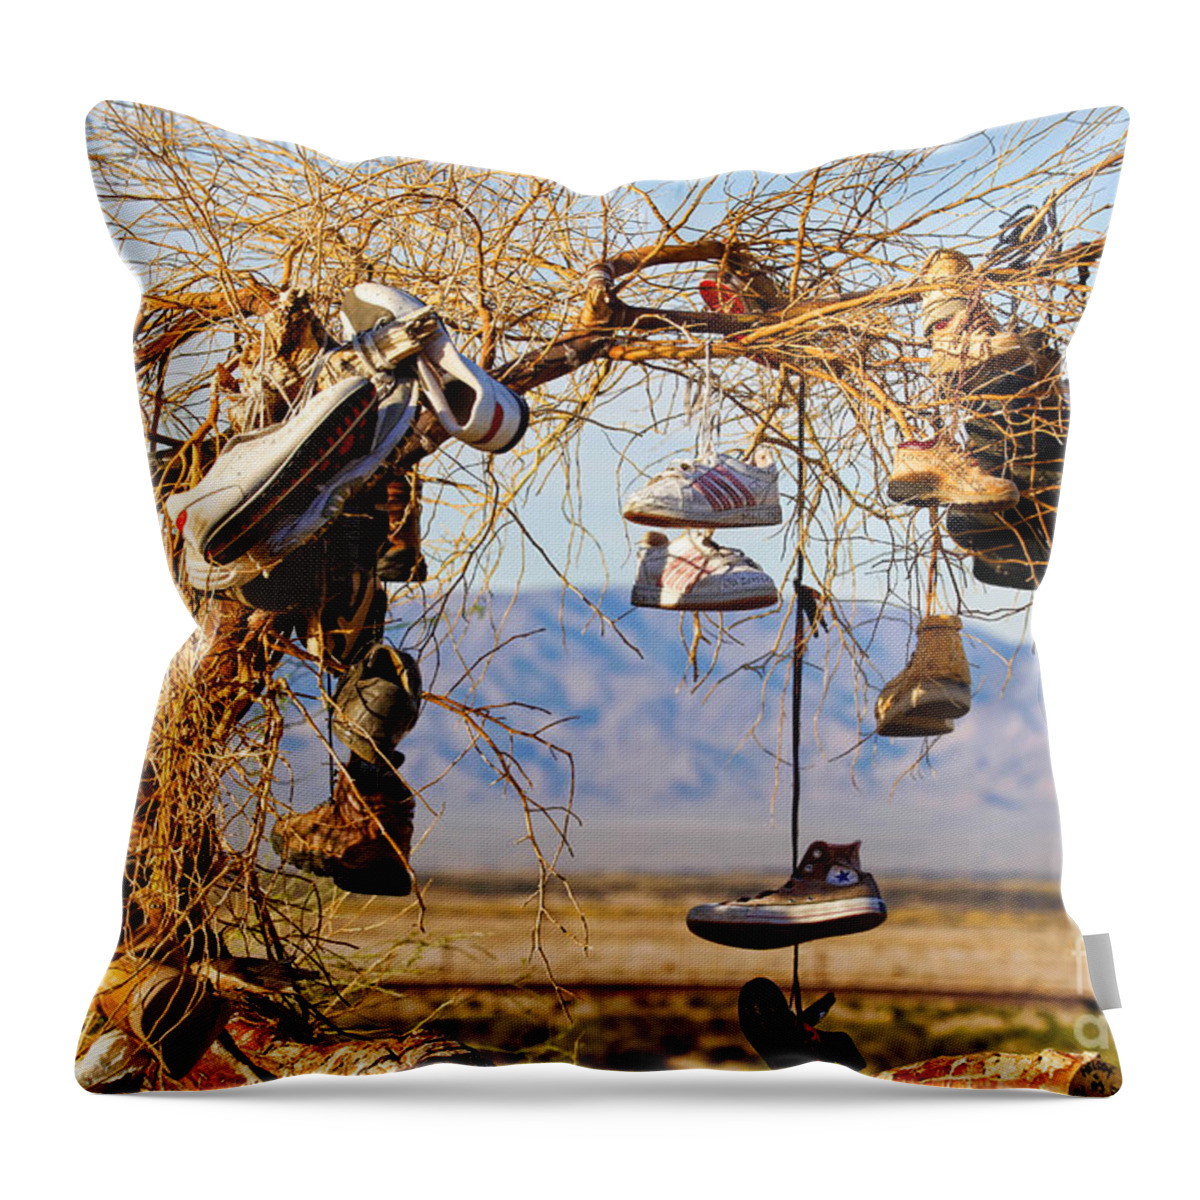 Amboy Shoe Tree Throw Pillow featuring the photograph Amboy Branch of Shoes by Diana Sainz by Diana Raquel Sainz